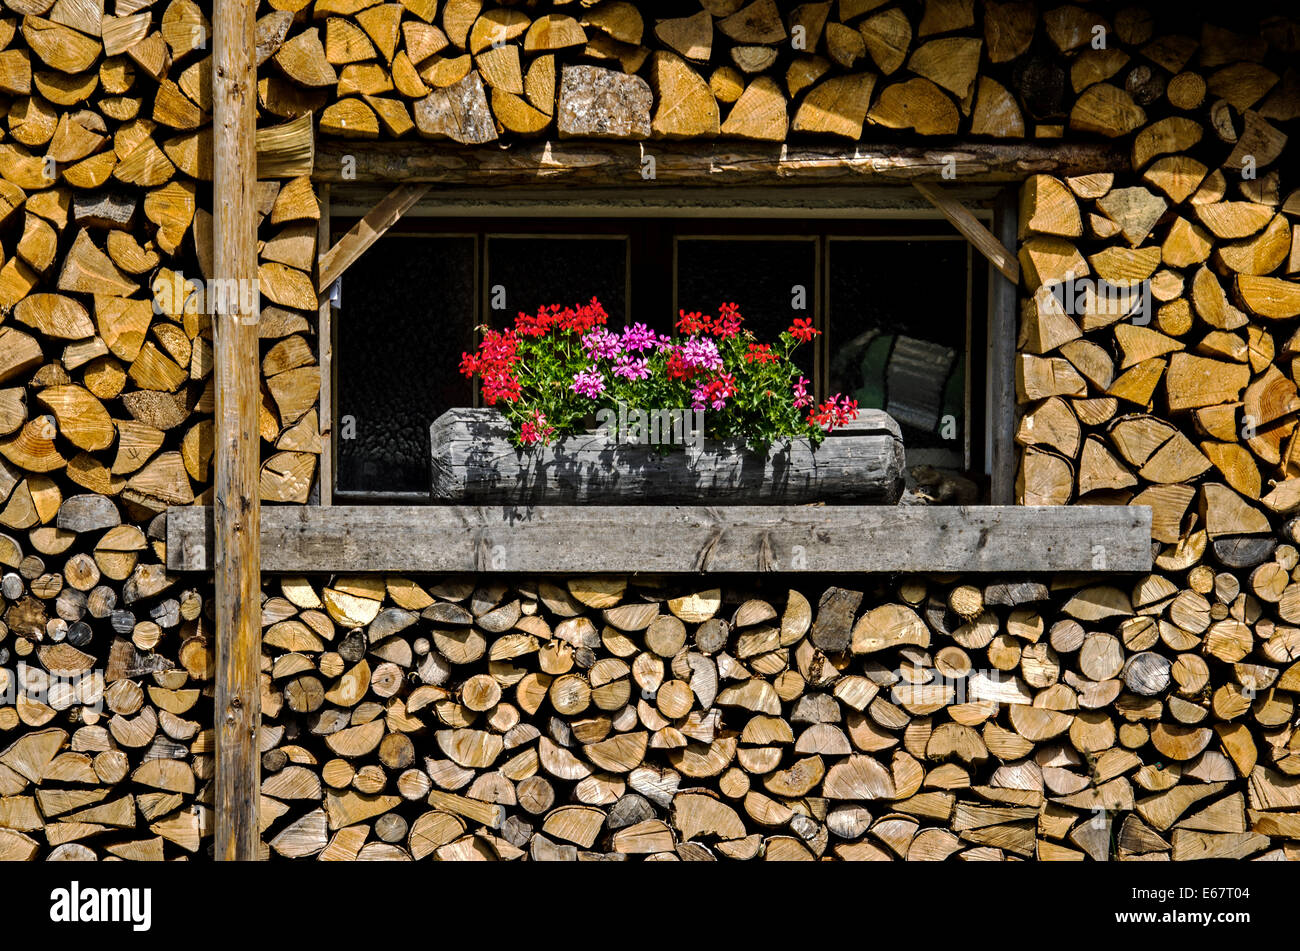 Summertime, fireword being stored for the coming winter in the Chamonix Valley in the French Alps. Stock Photo